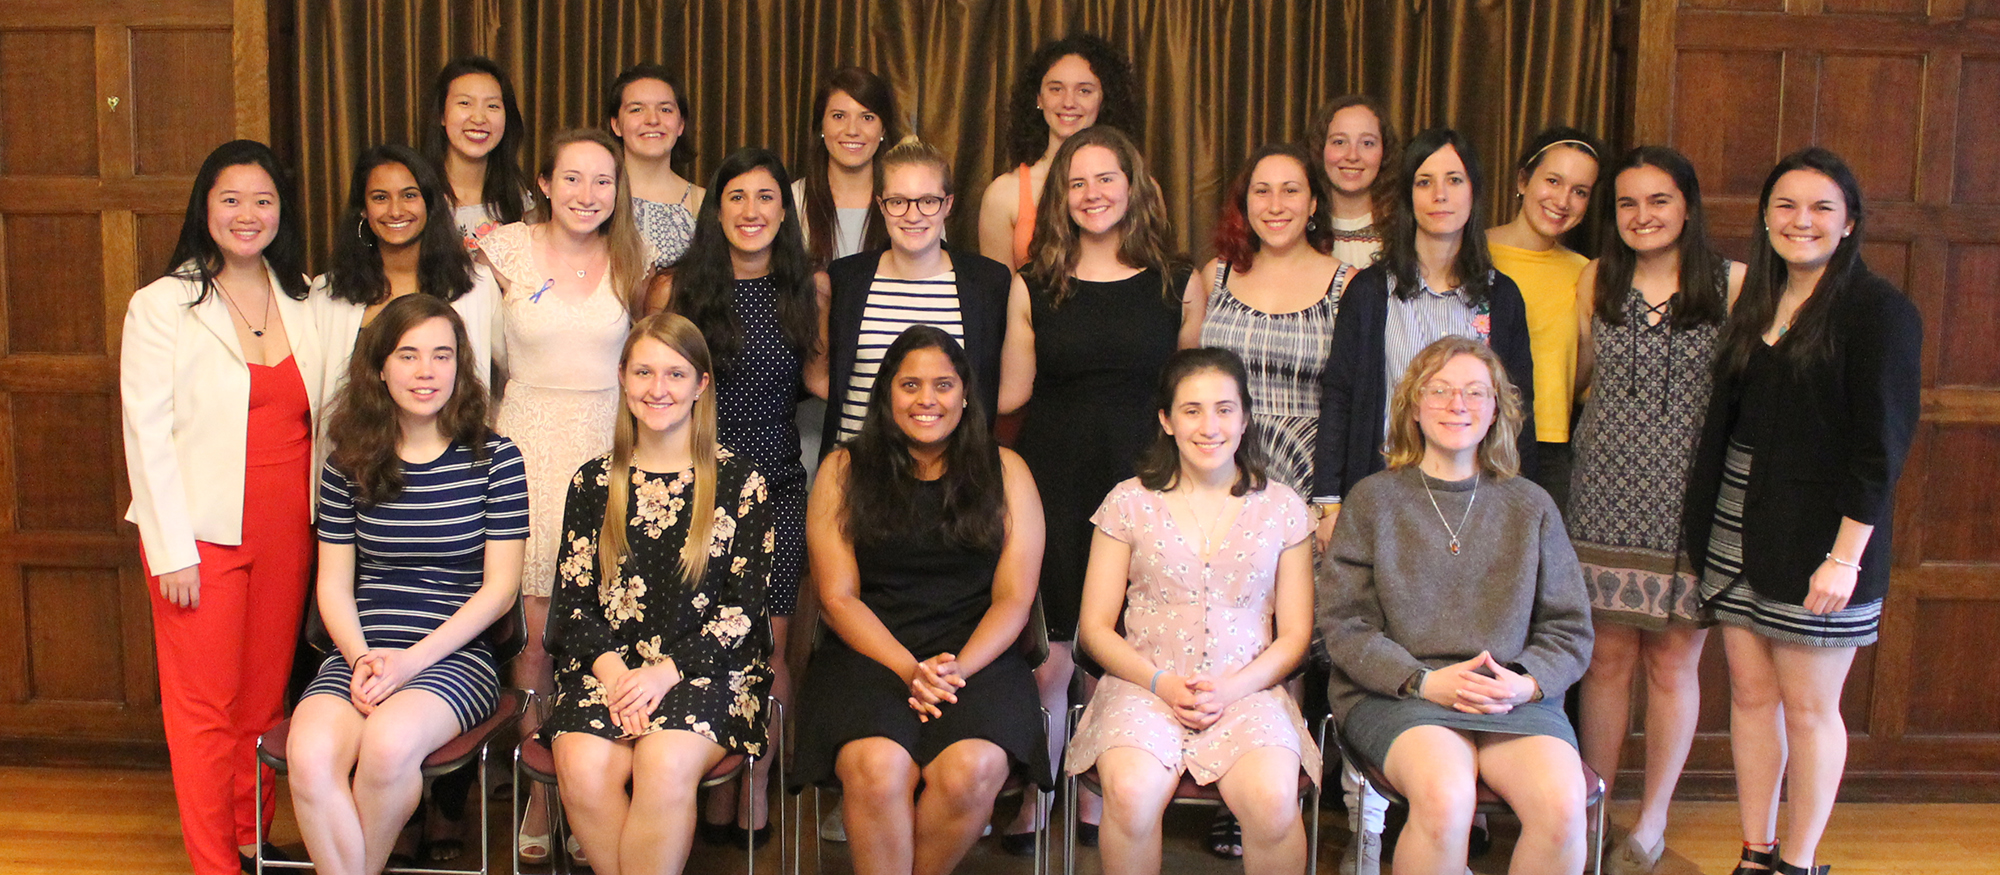 The 24 student-athletes honored as MHC Senior Scholar-Athletes at an awards ceremony on May 1st.